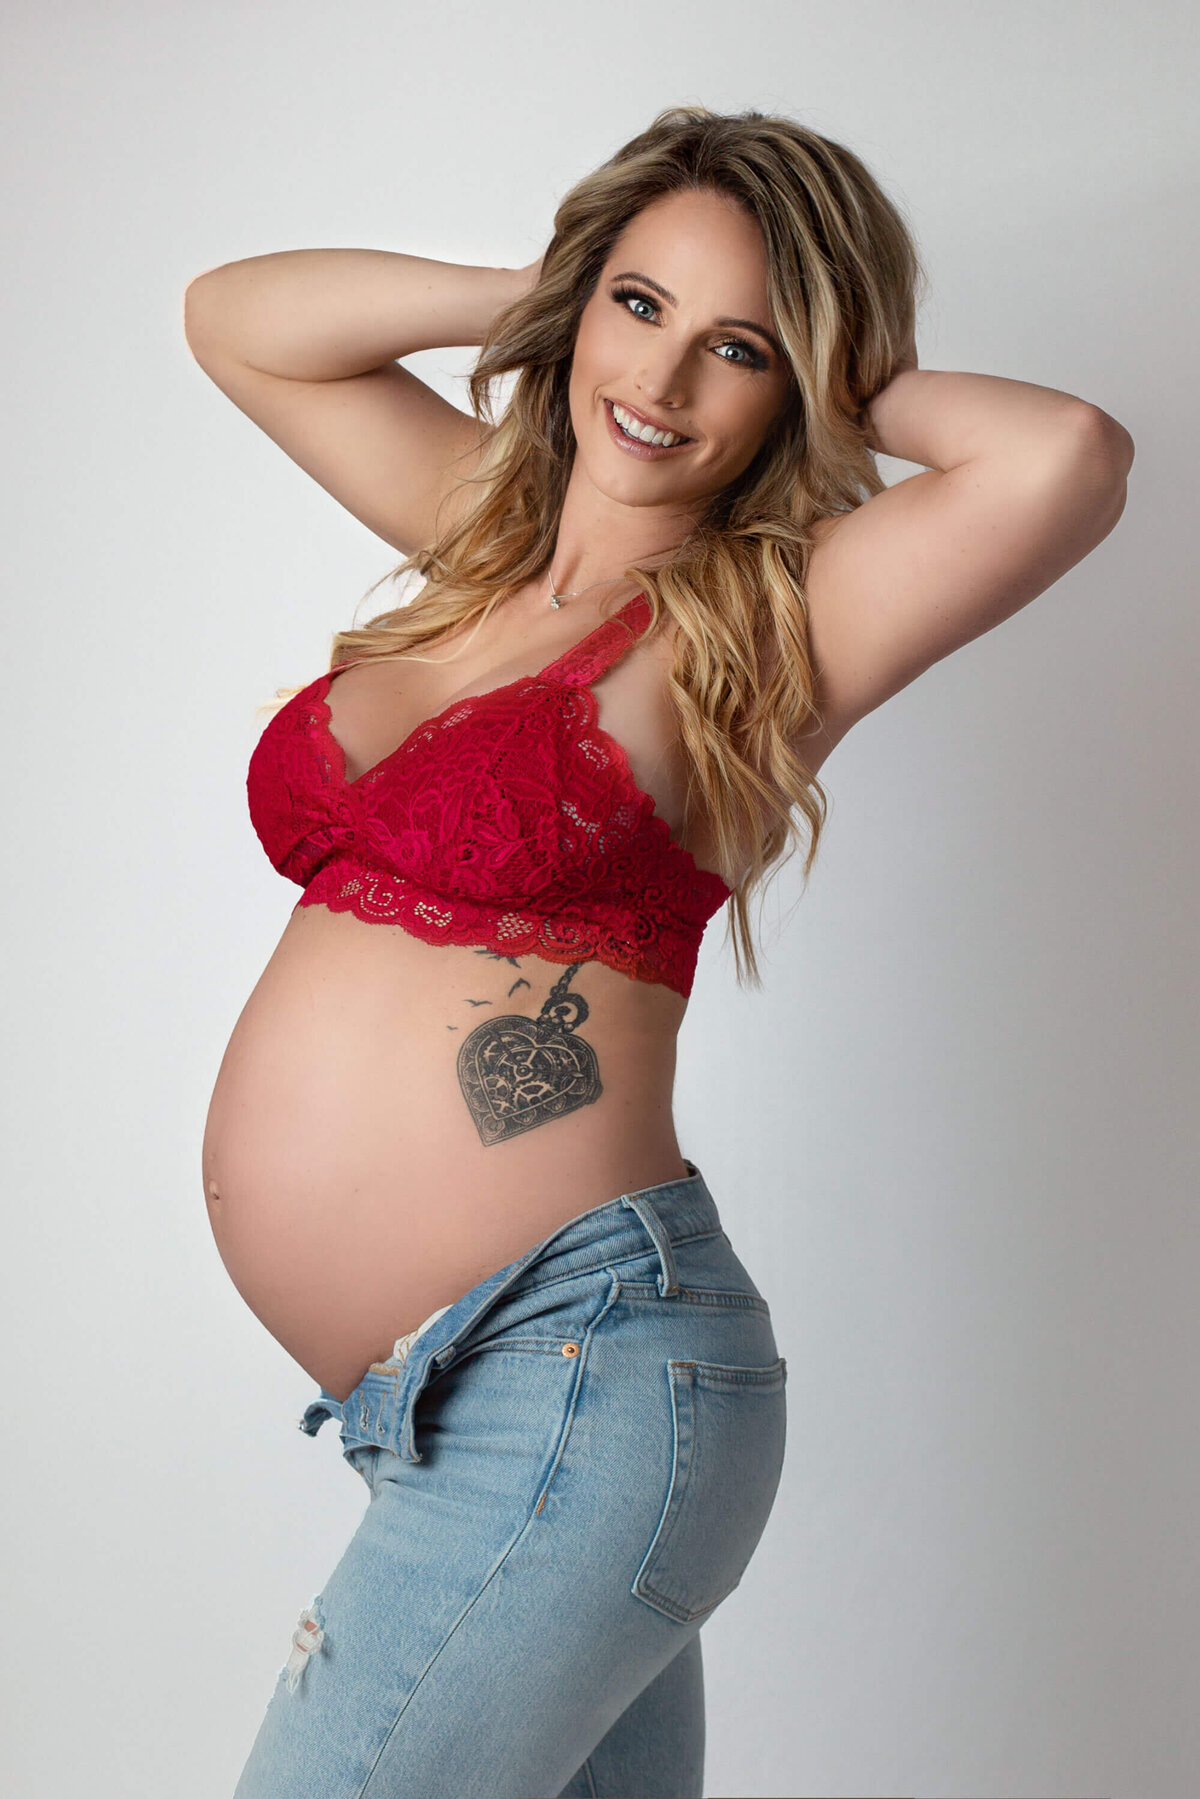 beautiful pregnant mother posing for hamilton maternity photographer - White Orchid Photography